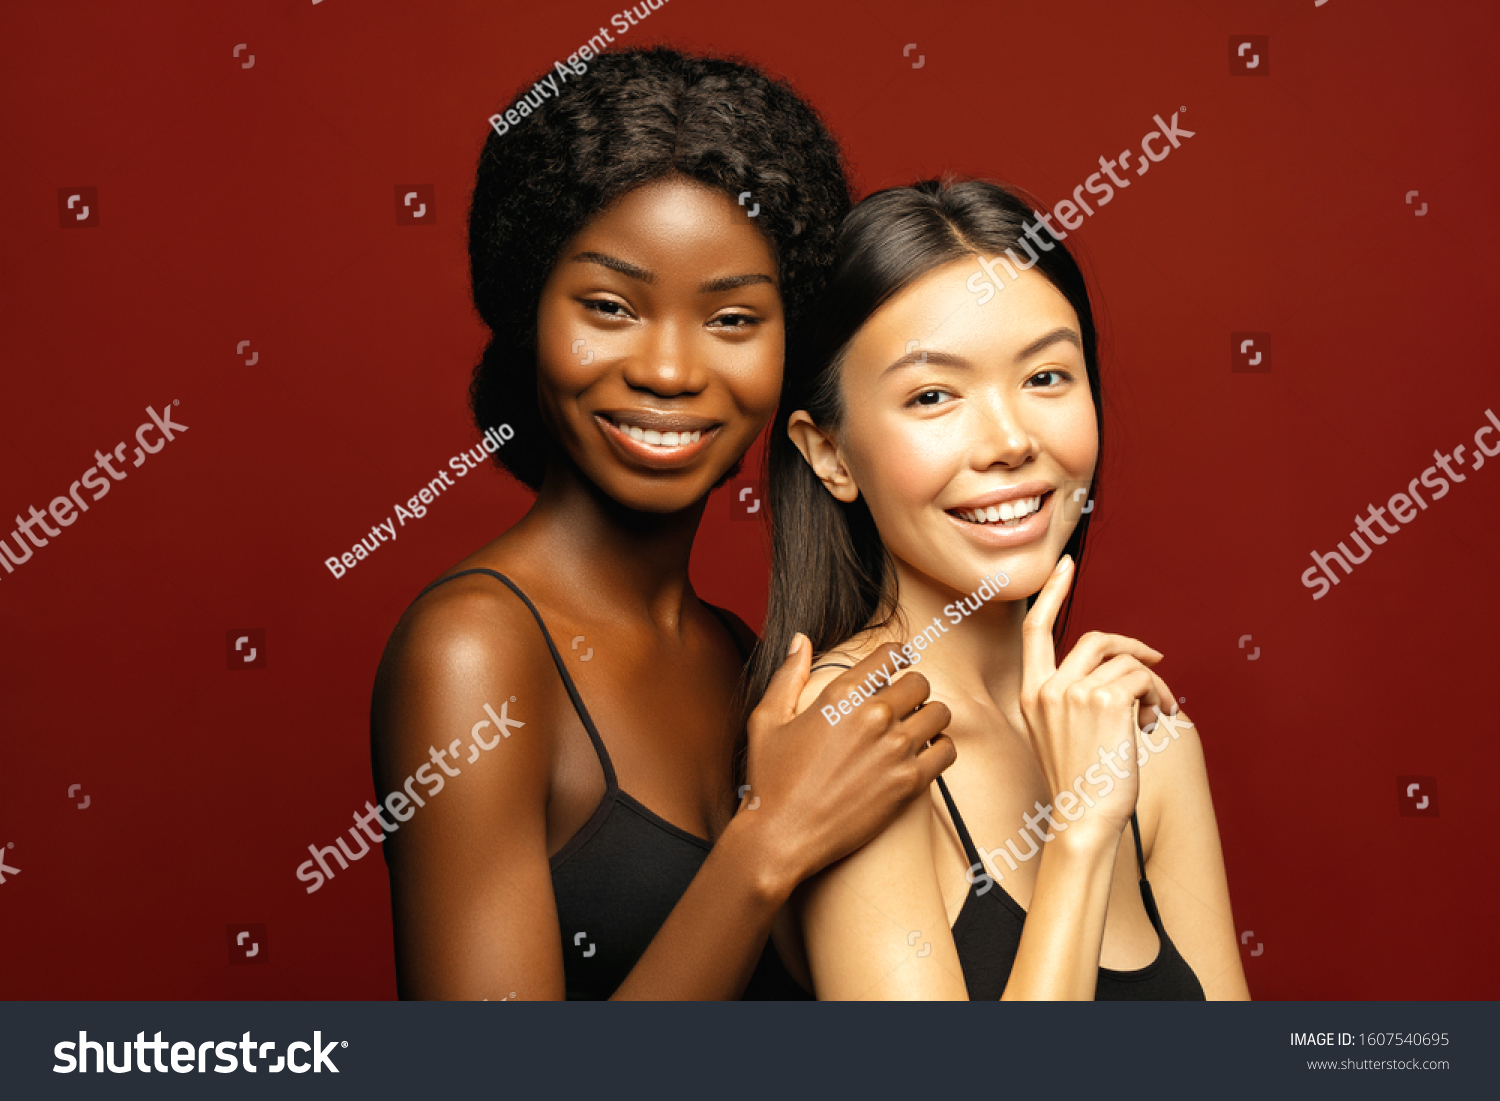 Multi Ethnic Group of beauty Womans with diffrent types of skin  together and looking on camera. Two Diverse ethnicity women -  African and Asian posing and smiling against red background. #1607540695